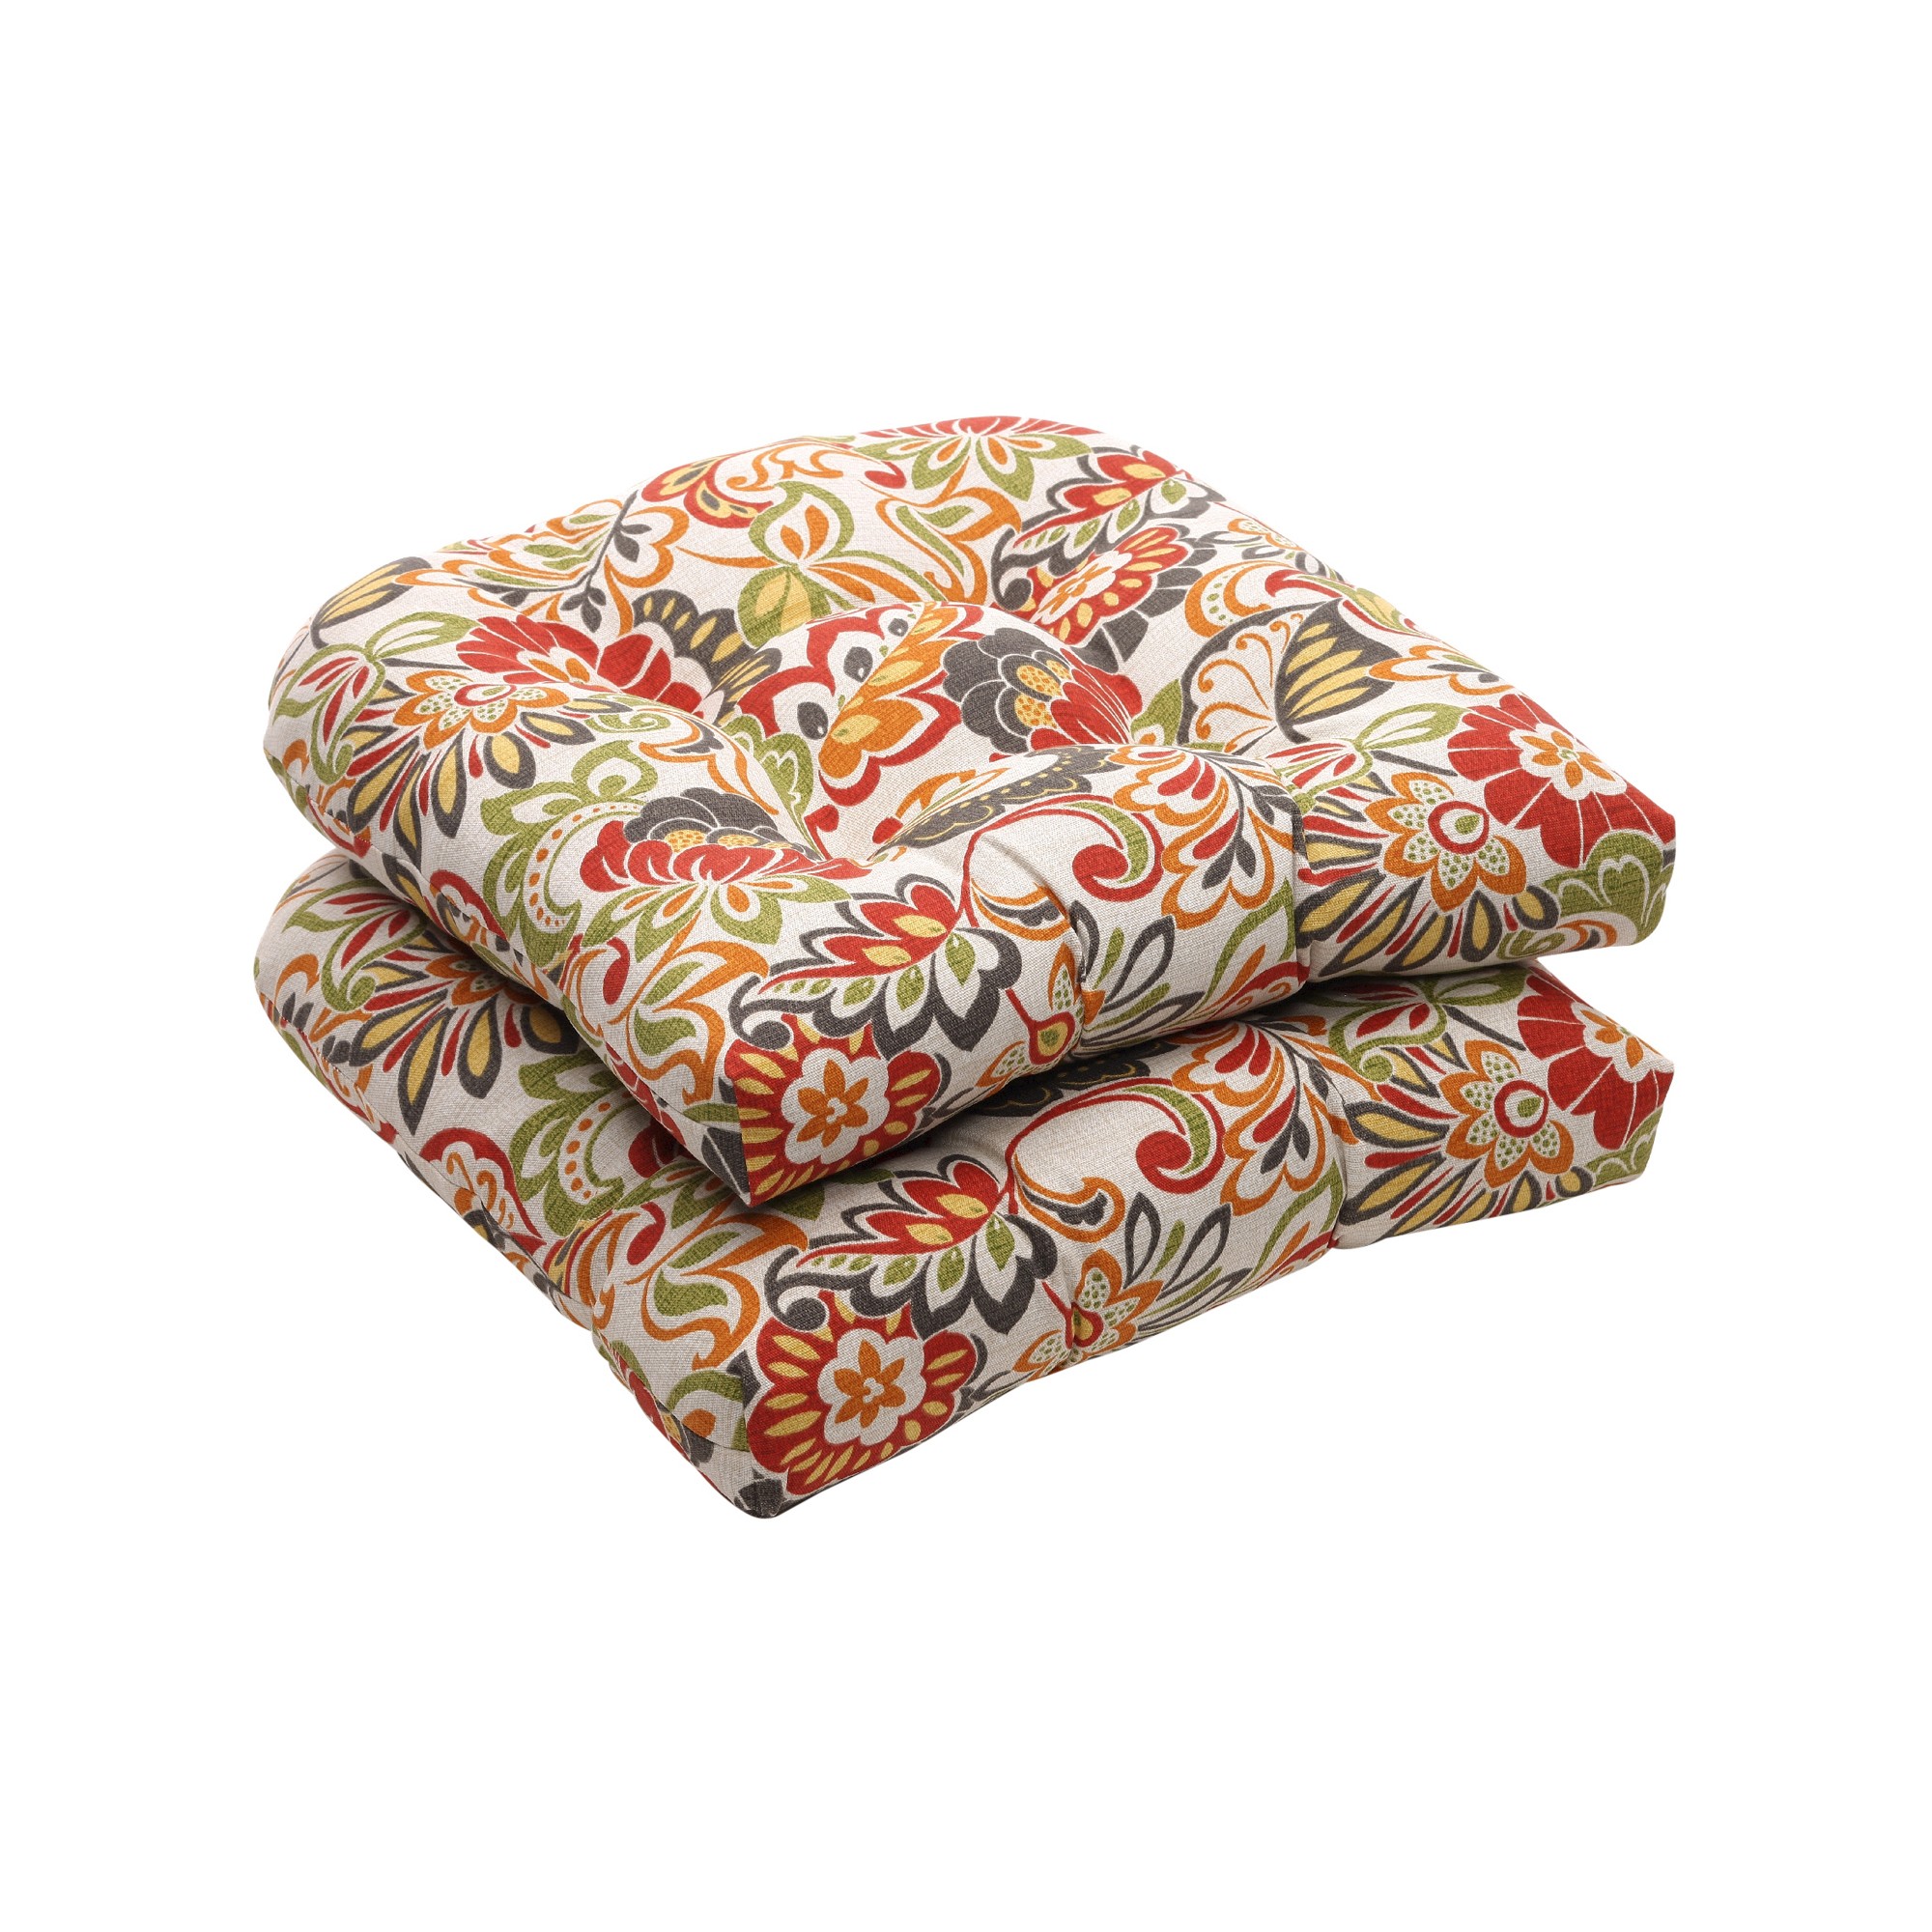 Outdoor 2-Piece Wicker Chair Cushion Set - Green/Off-White/Red Floral